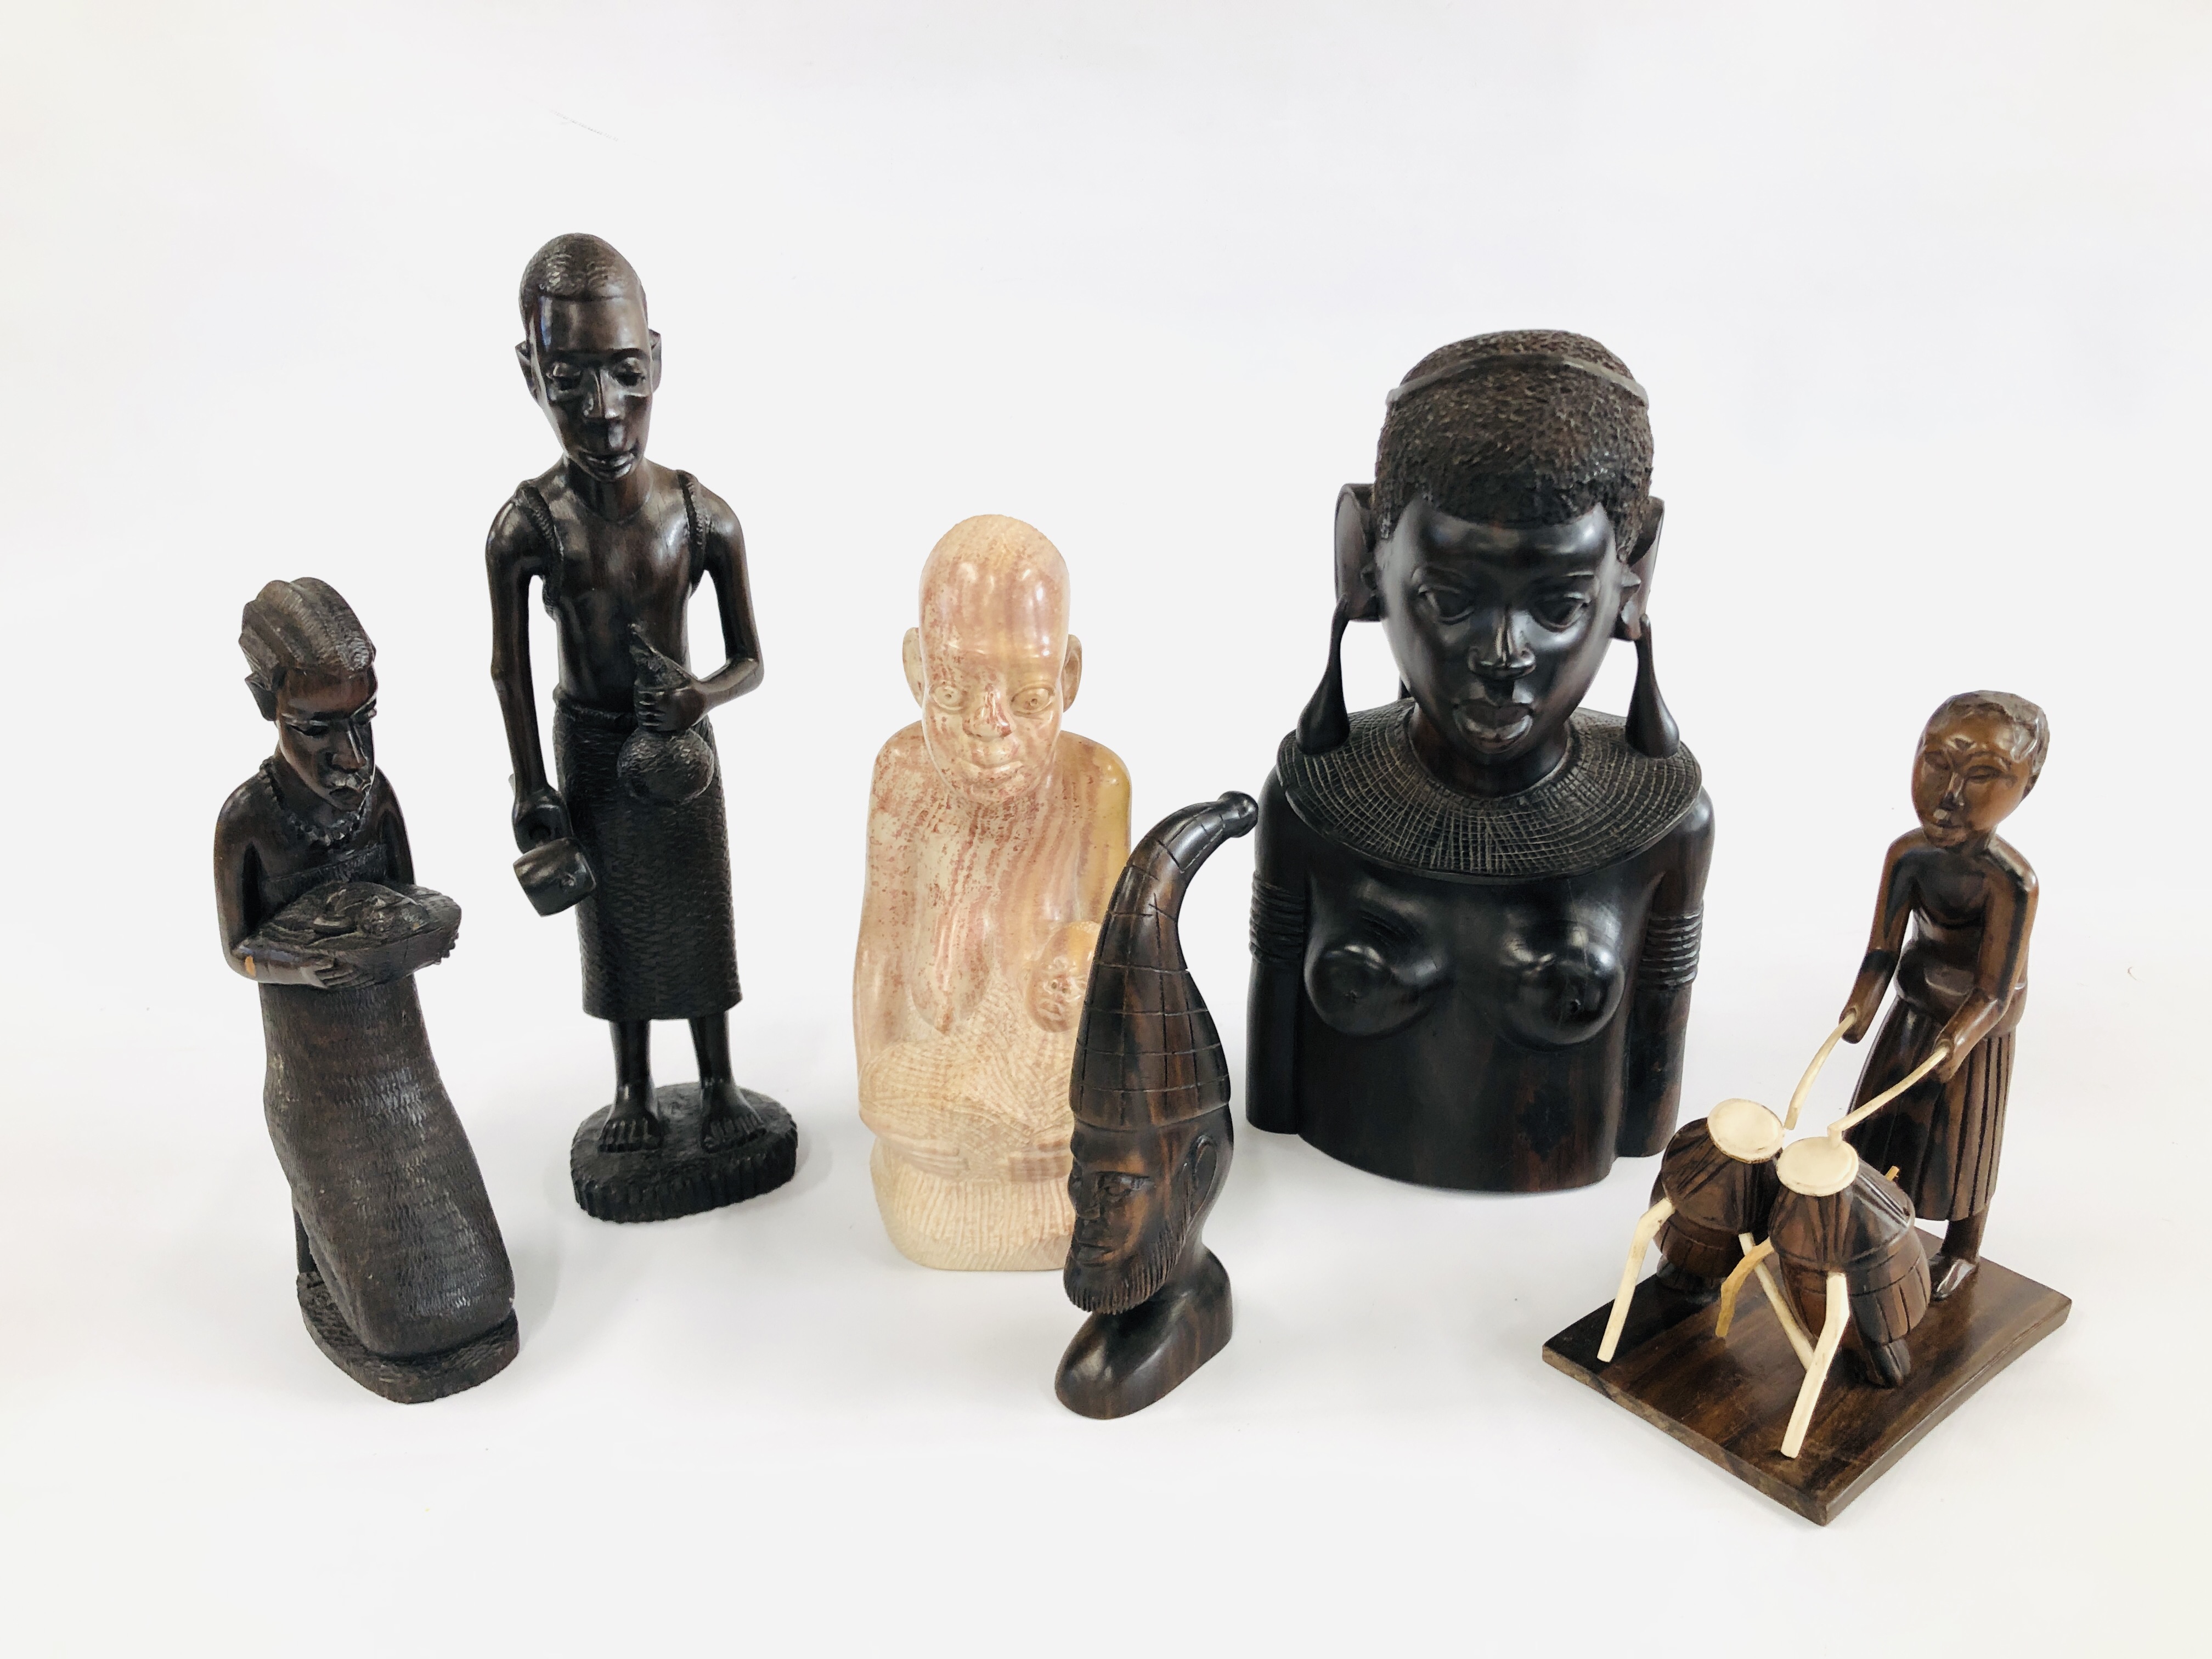 A HARD WOOD AFRICAN TRIBAL BUST ALONG WITH A FURTHER TWO FIGURES ONE OF WHICH IS HOLDING A NEW BORN